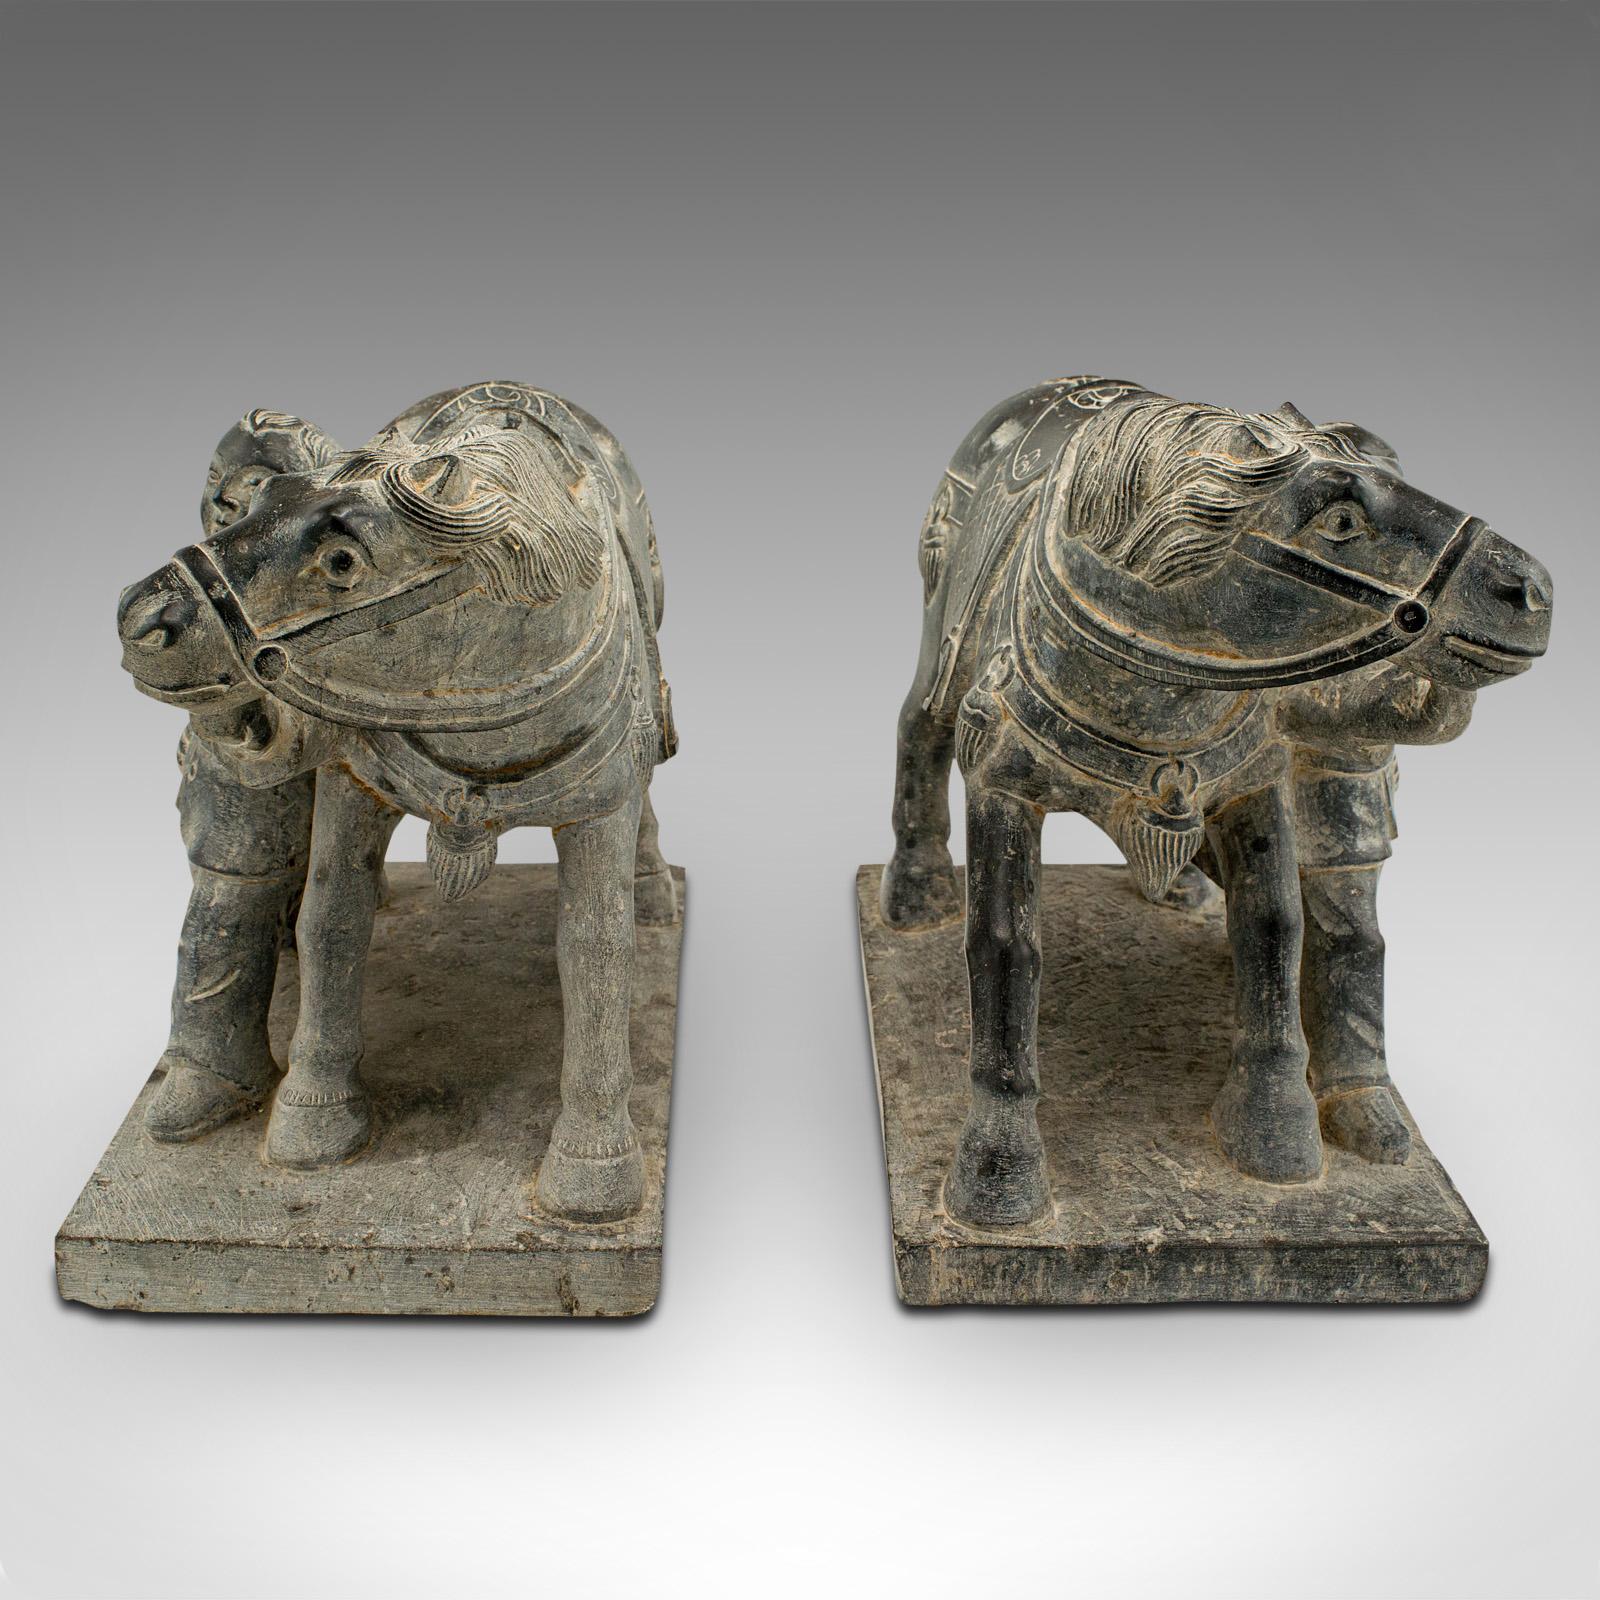 This is a heavy pair of vintage horse and groom figures. An Oriental, stone fireside ornament or bookends, dating to the late 20th century, circa 1980.

Charming figures of substantial proportion and mass, perfect as bookends
Displaying a desirable